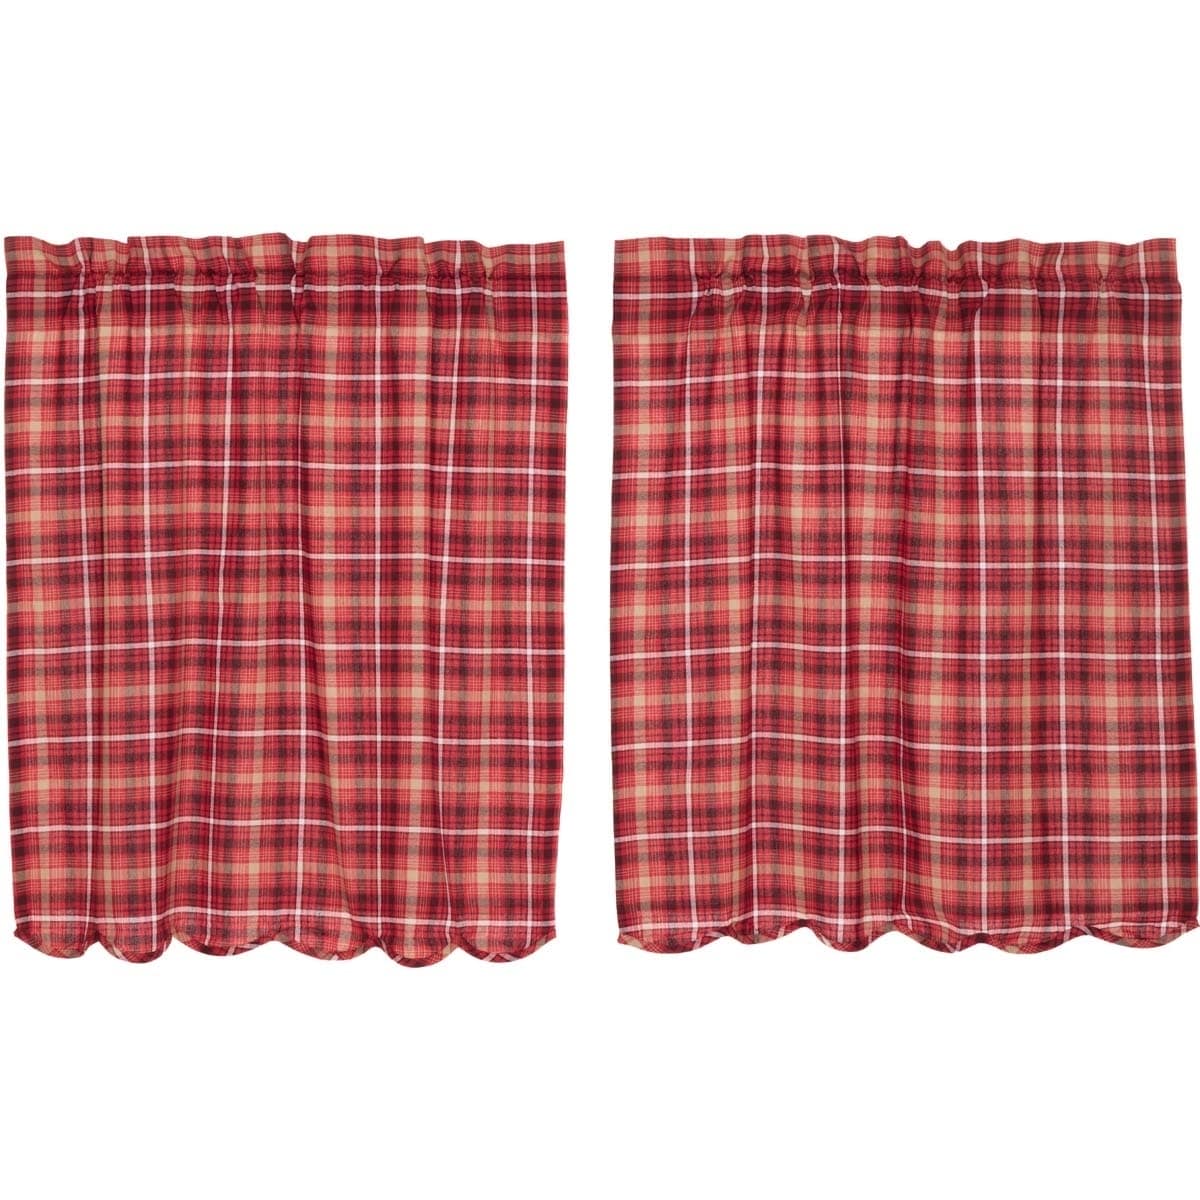 Shop Black Friday Deals On Red Rustic Kitchen Curtains Vhc Braxton Tier Pair Rod Pocket Cotton Plaid Overstock 17926208